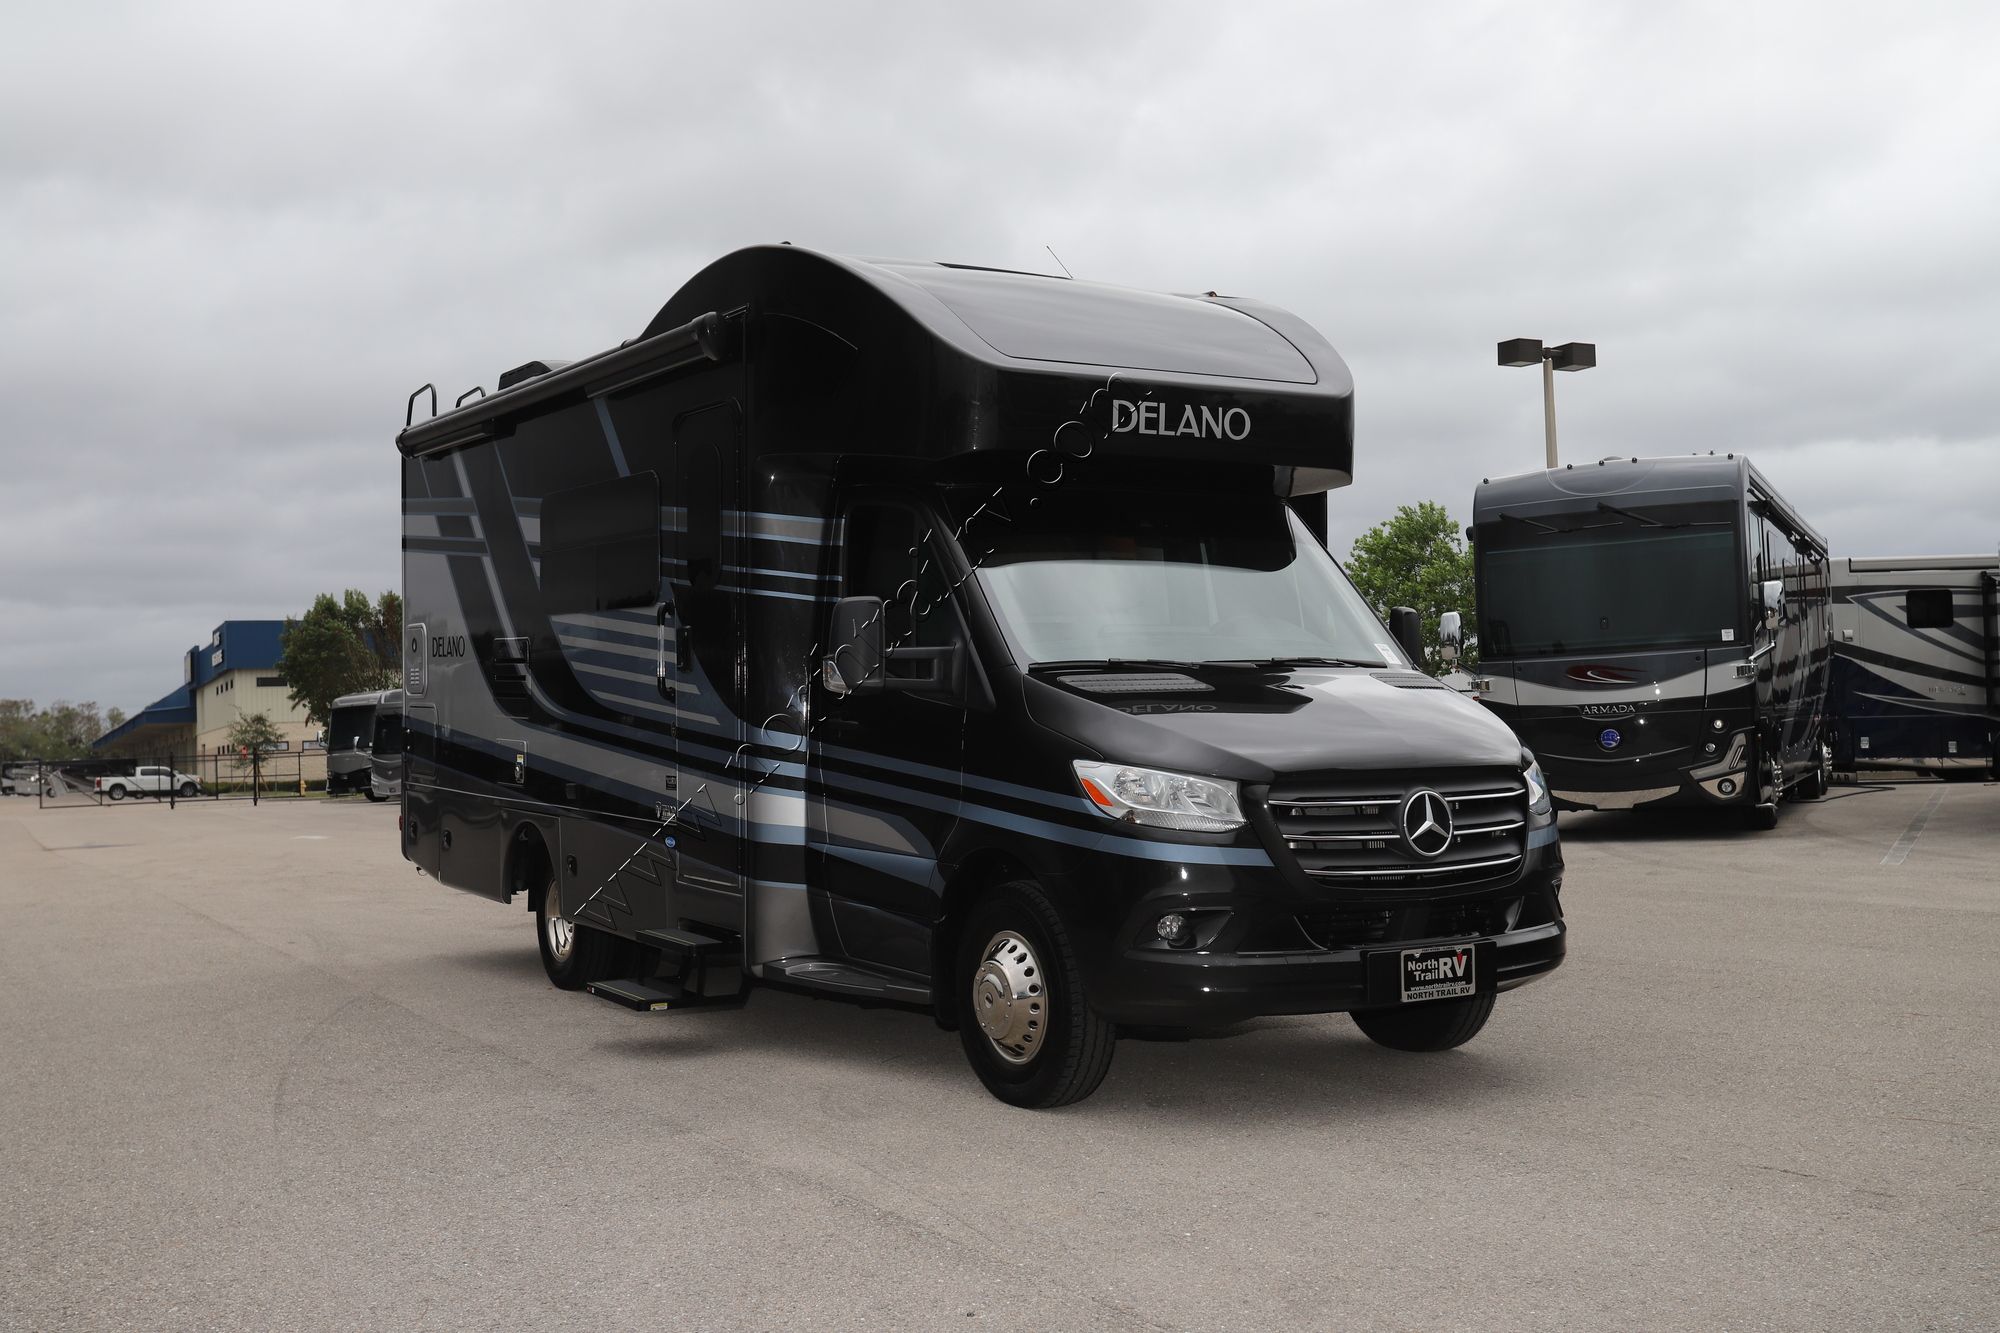 Used 2021 Thor Delano 24FB Class C  For Sale